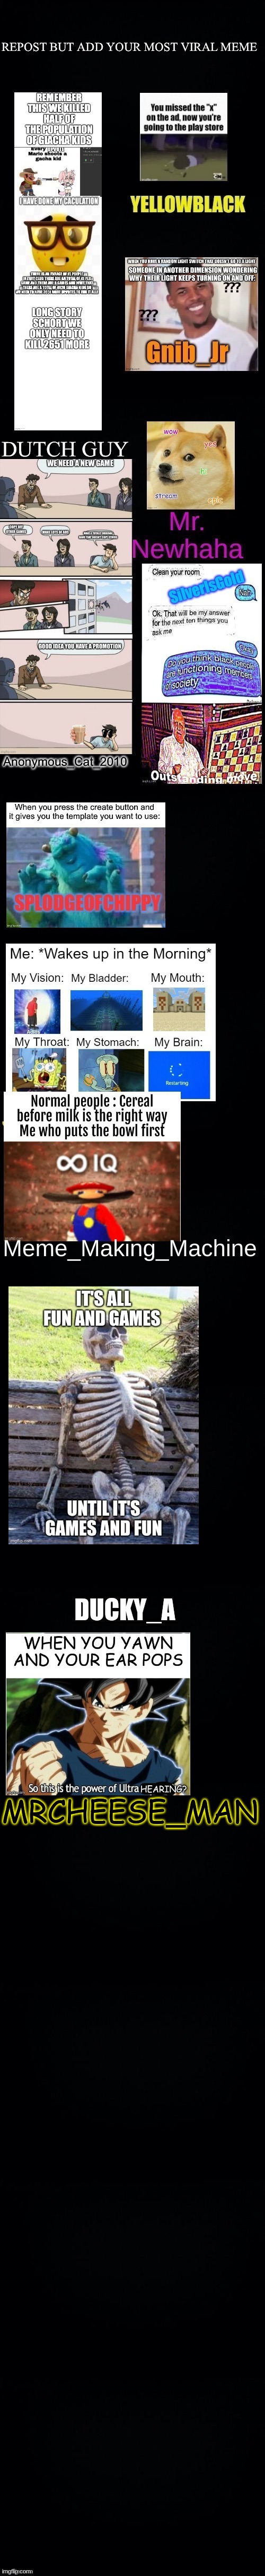 repost your meme | MRCHEESE_MAN | image tagged in repost | made w/ Imgflip meme maker